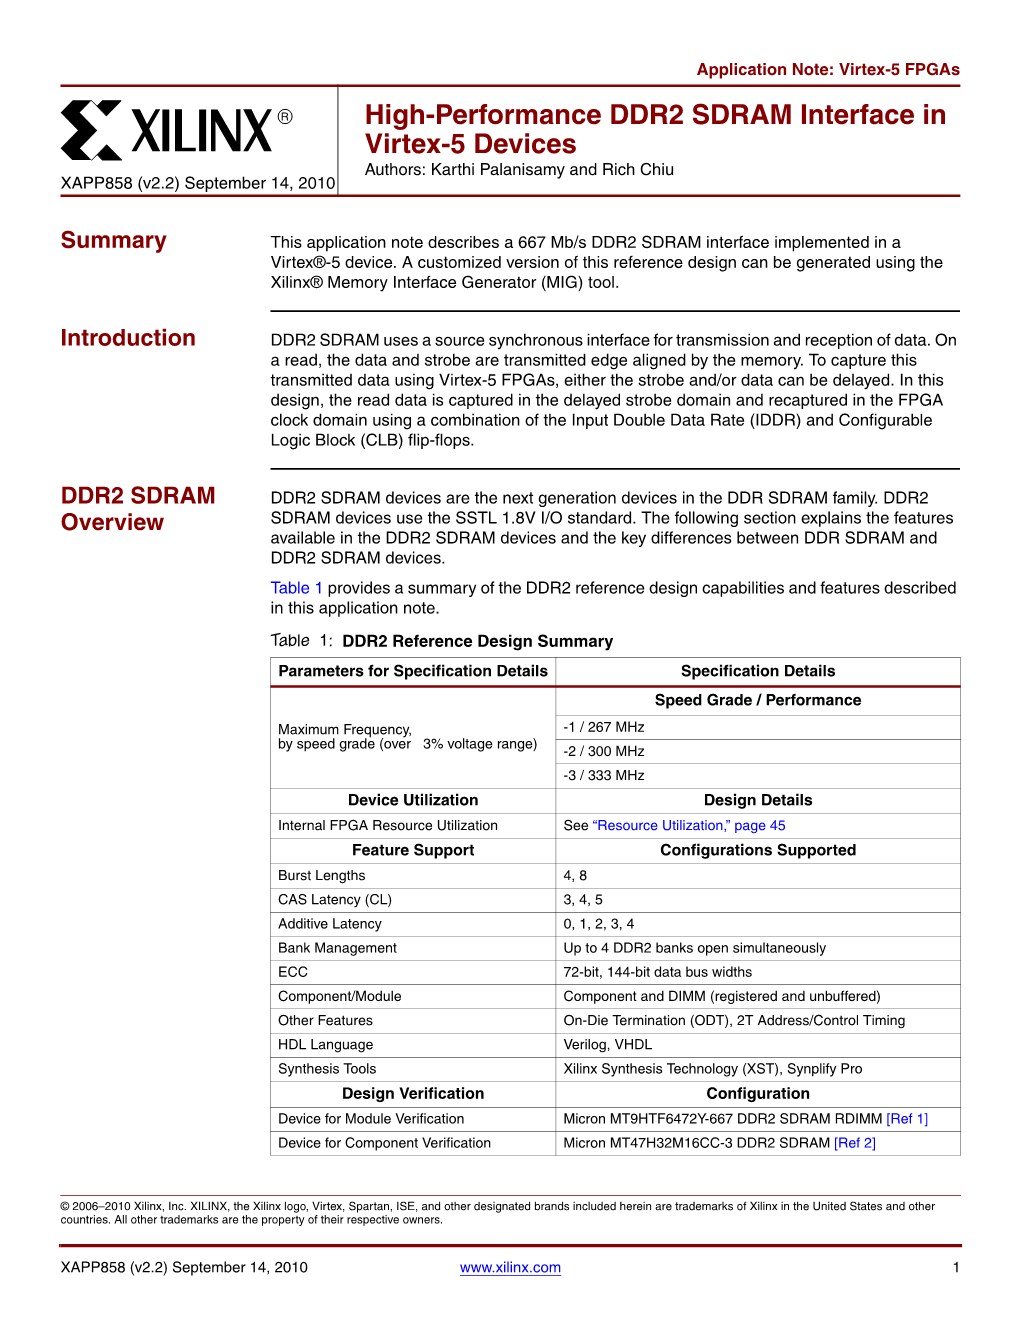 High-Performance DDR2 SDRAM Interface in Virtex-5 Devices Authors: Karthi Palanisamy and Rich Chiu XAPP858 (V2.2) September 14, 2010